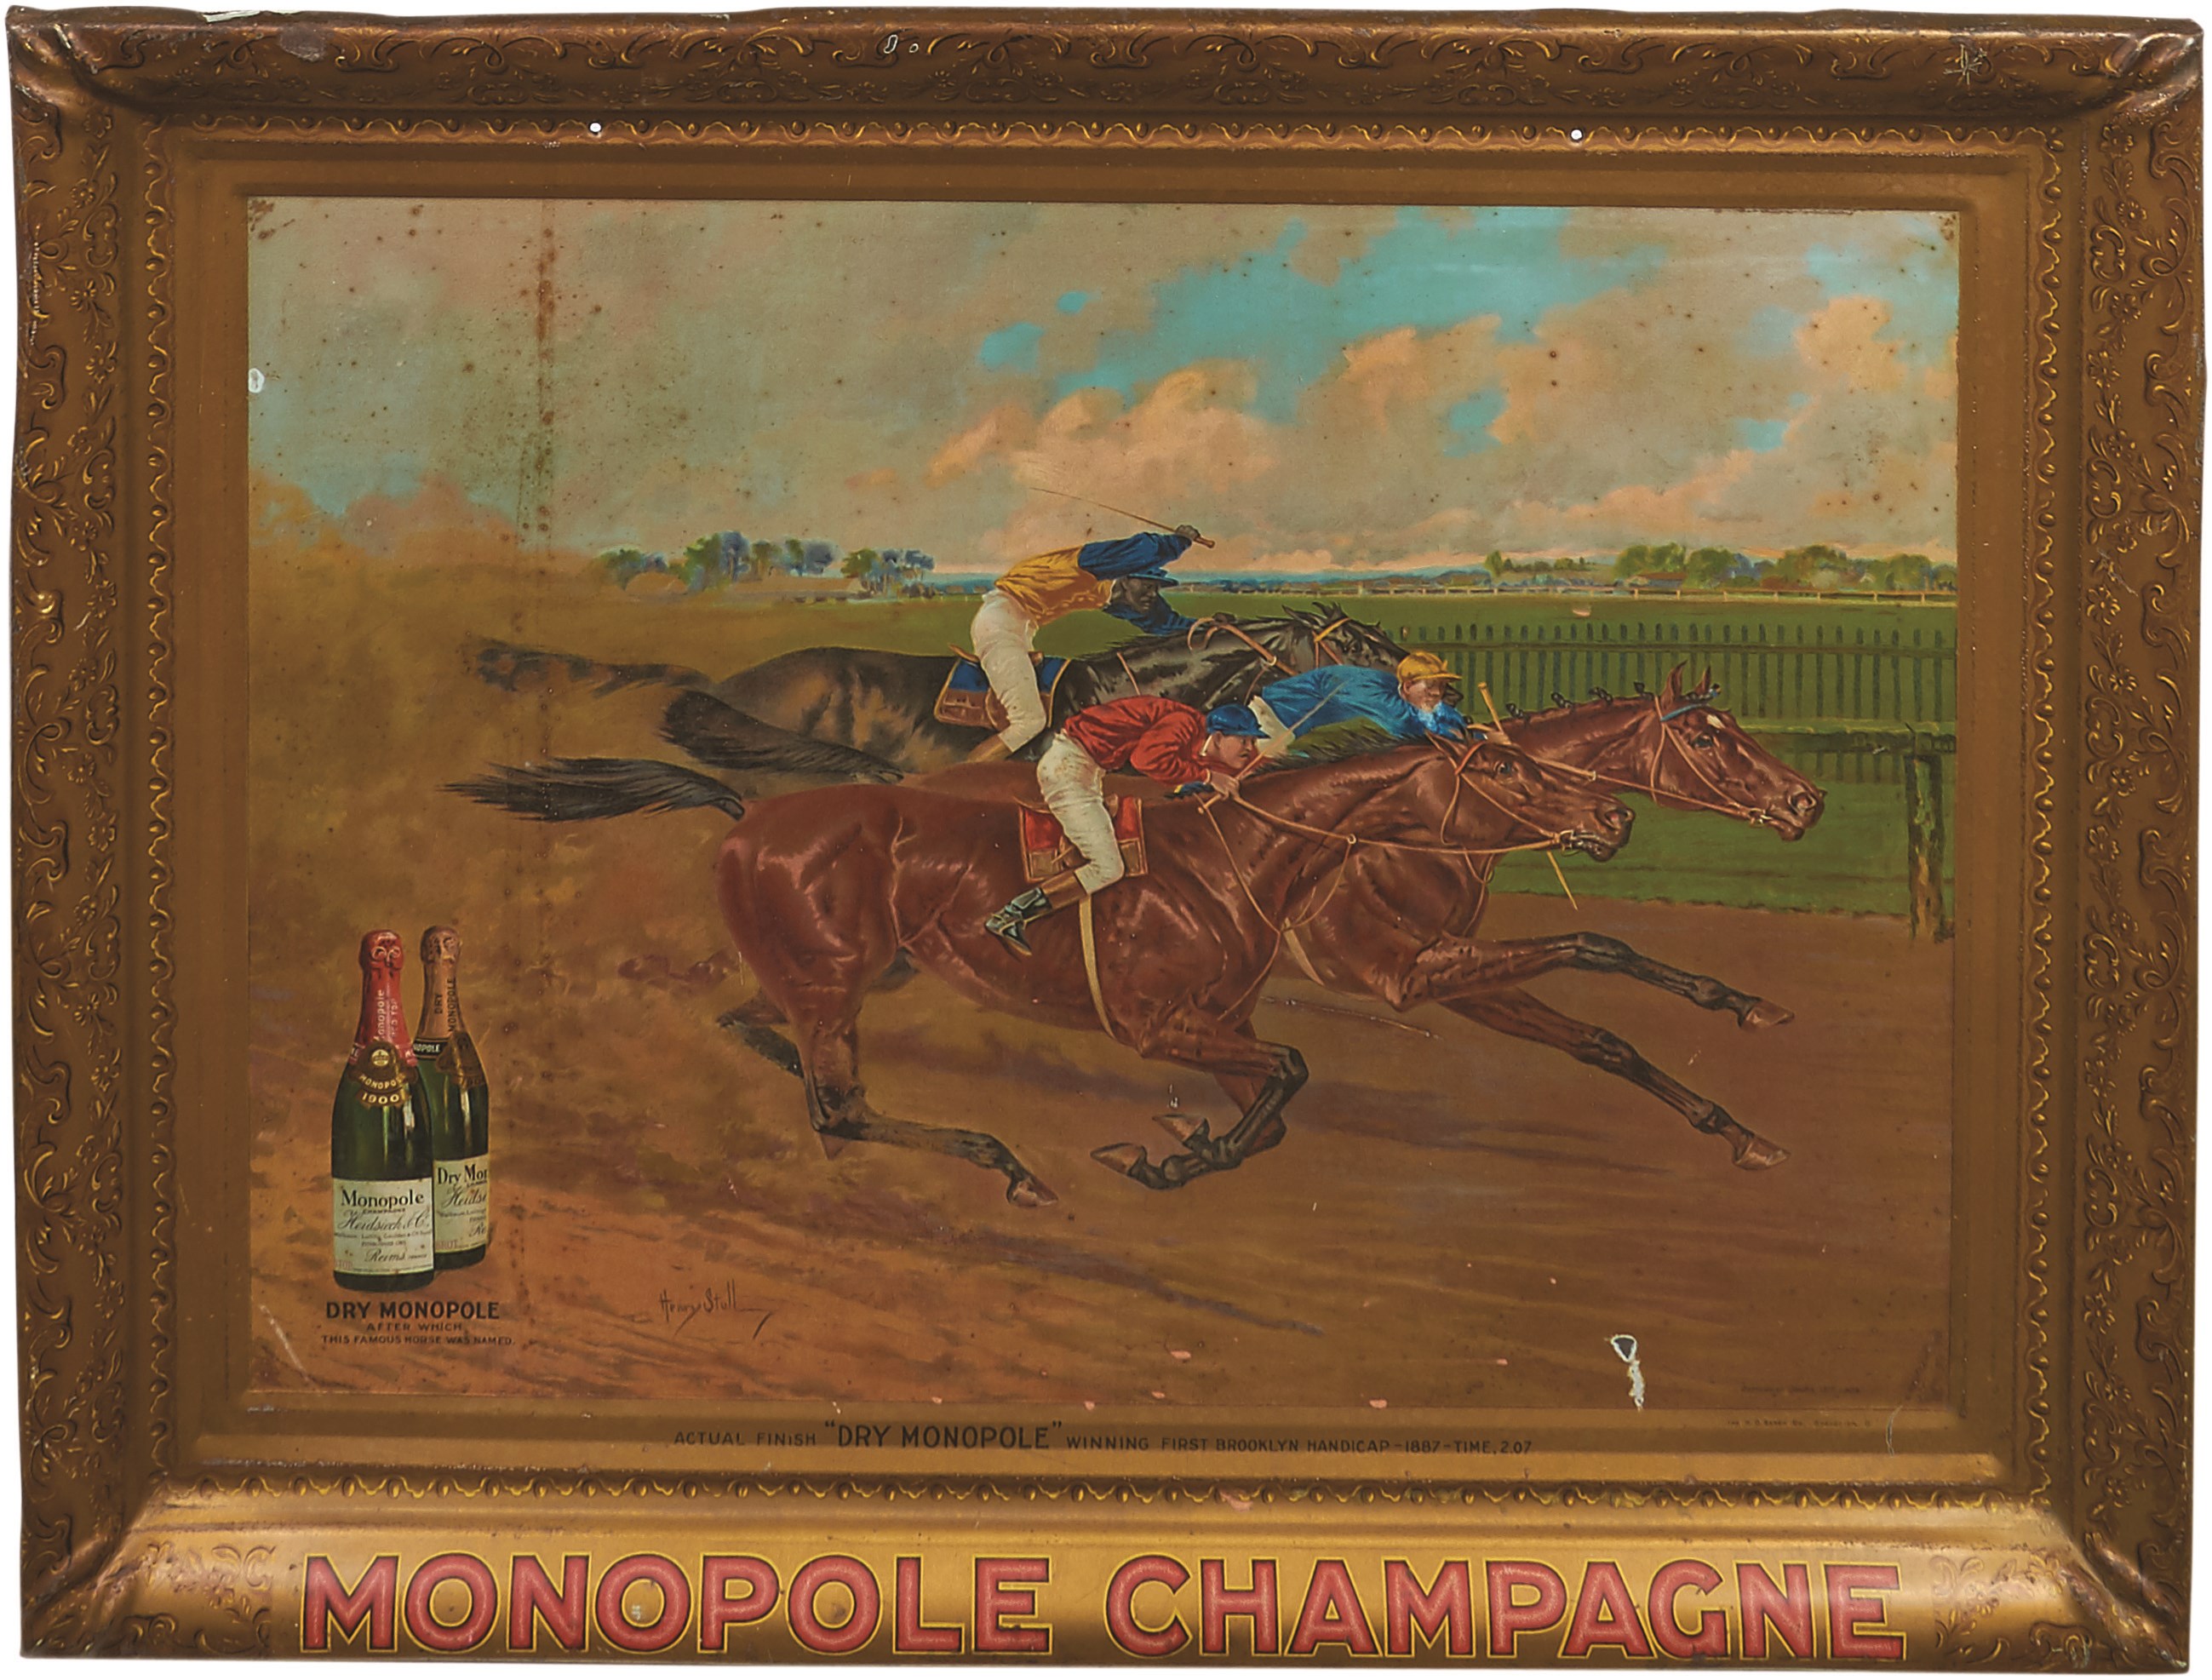 - Early Monopole Champagne Tin Advertising Sign by Henry Stull